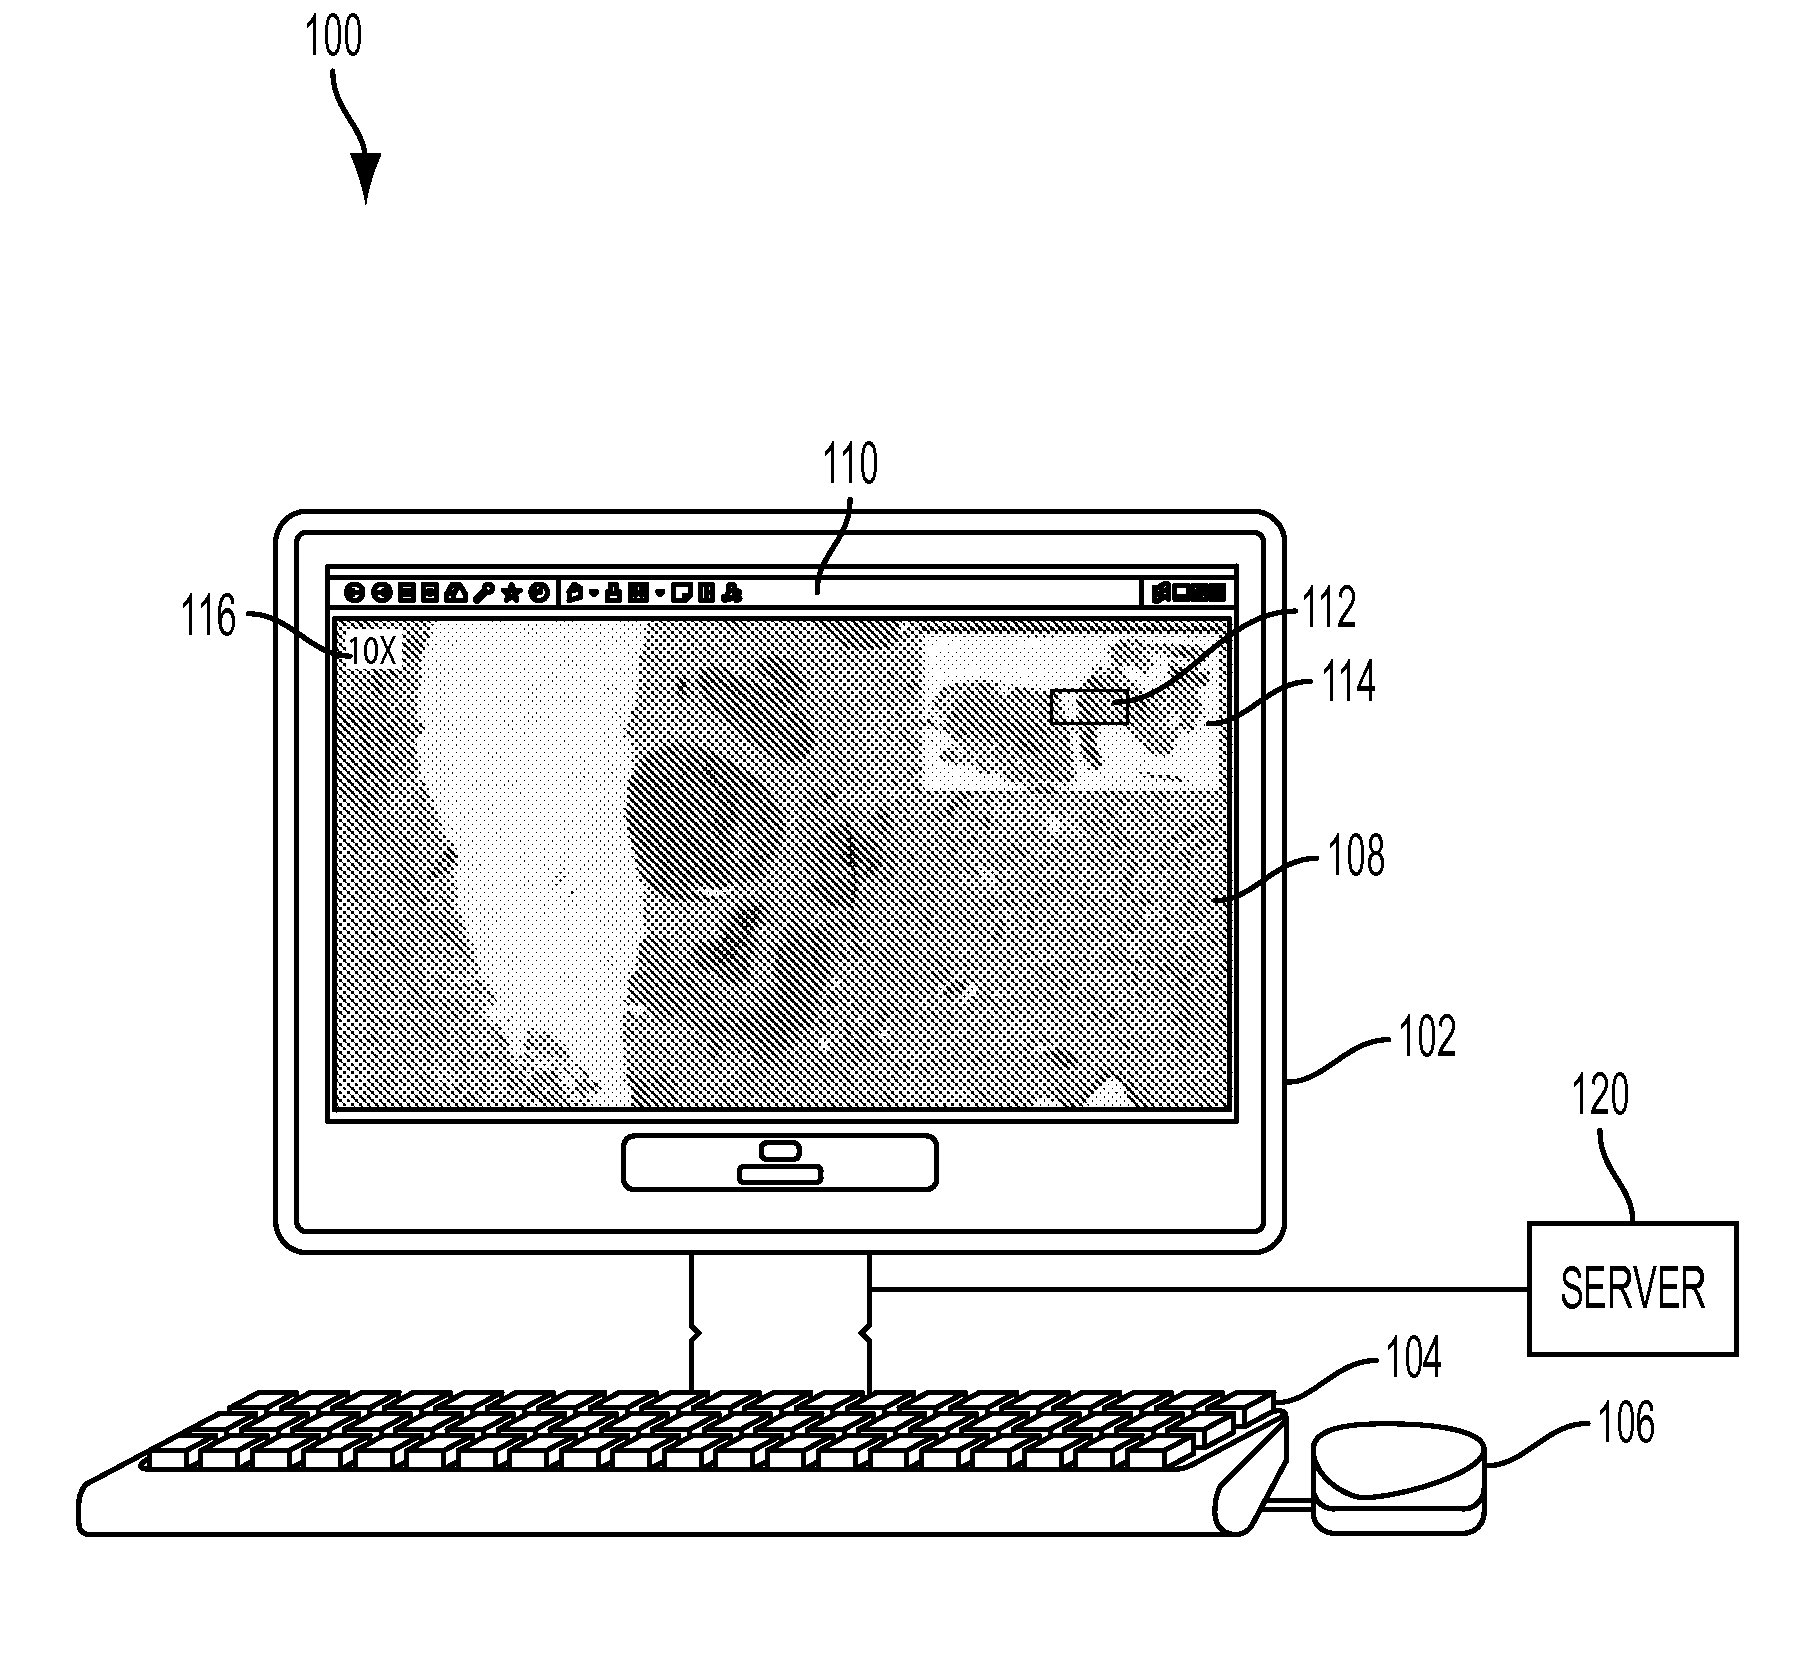 System and Method for Improved Viewing and Navigation of Digital Images